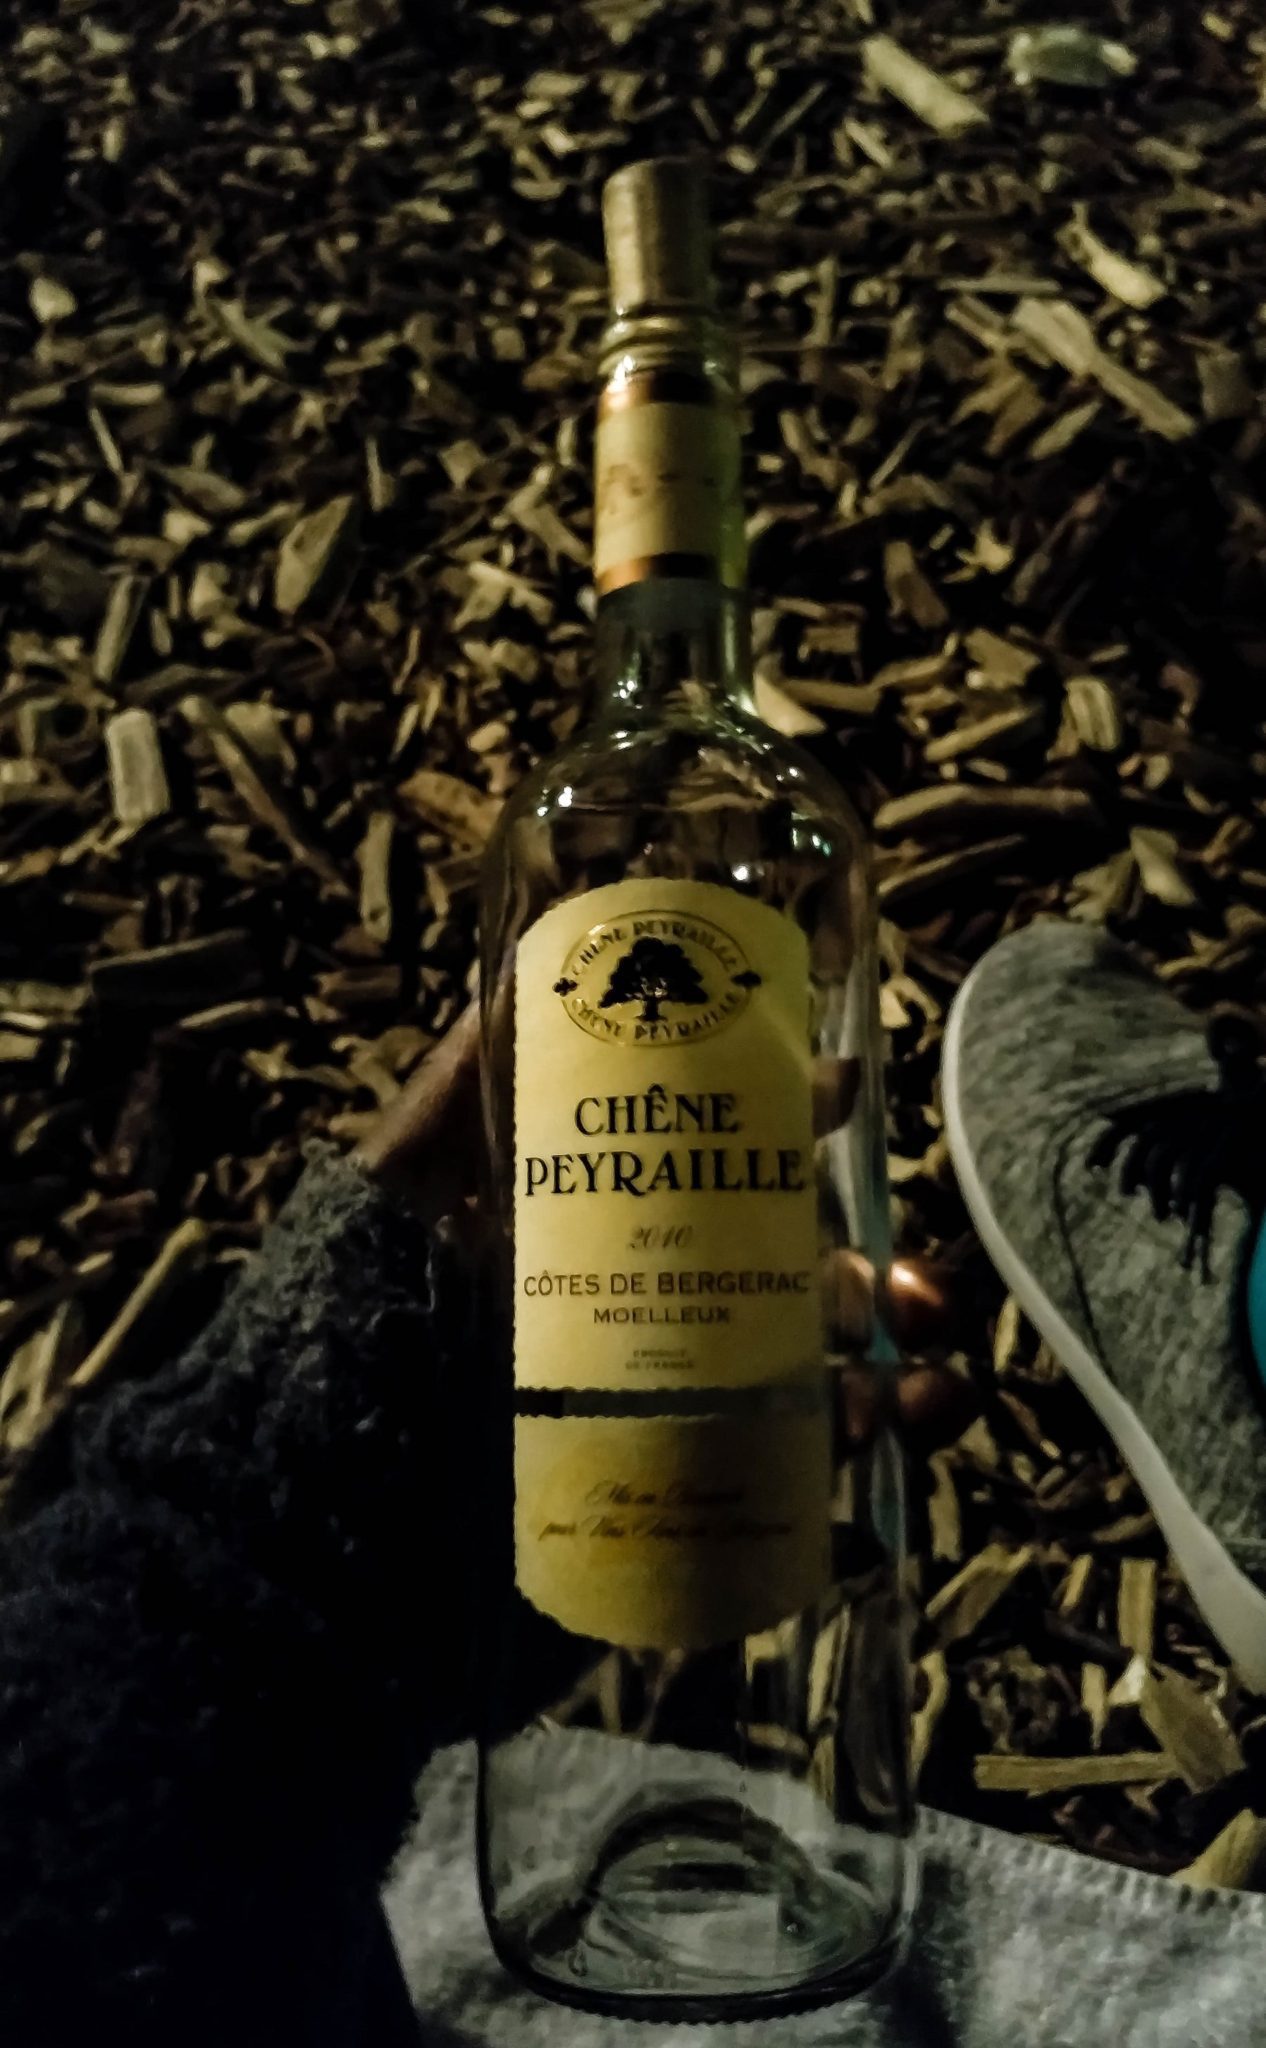 Delicious Montbazillac wine we consumed will watching the twinkling lights of the Eiffel tower